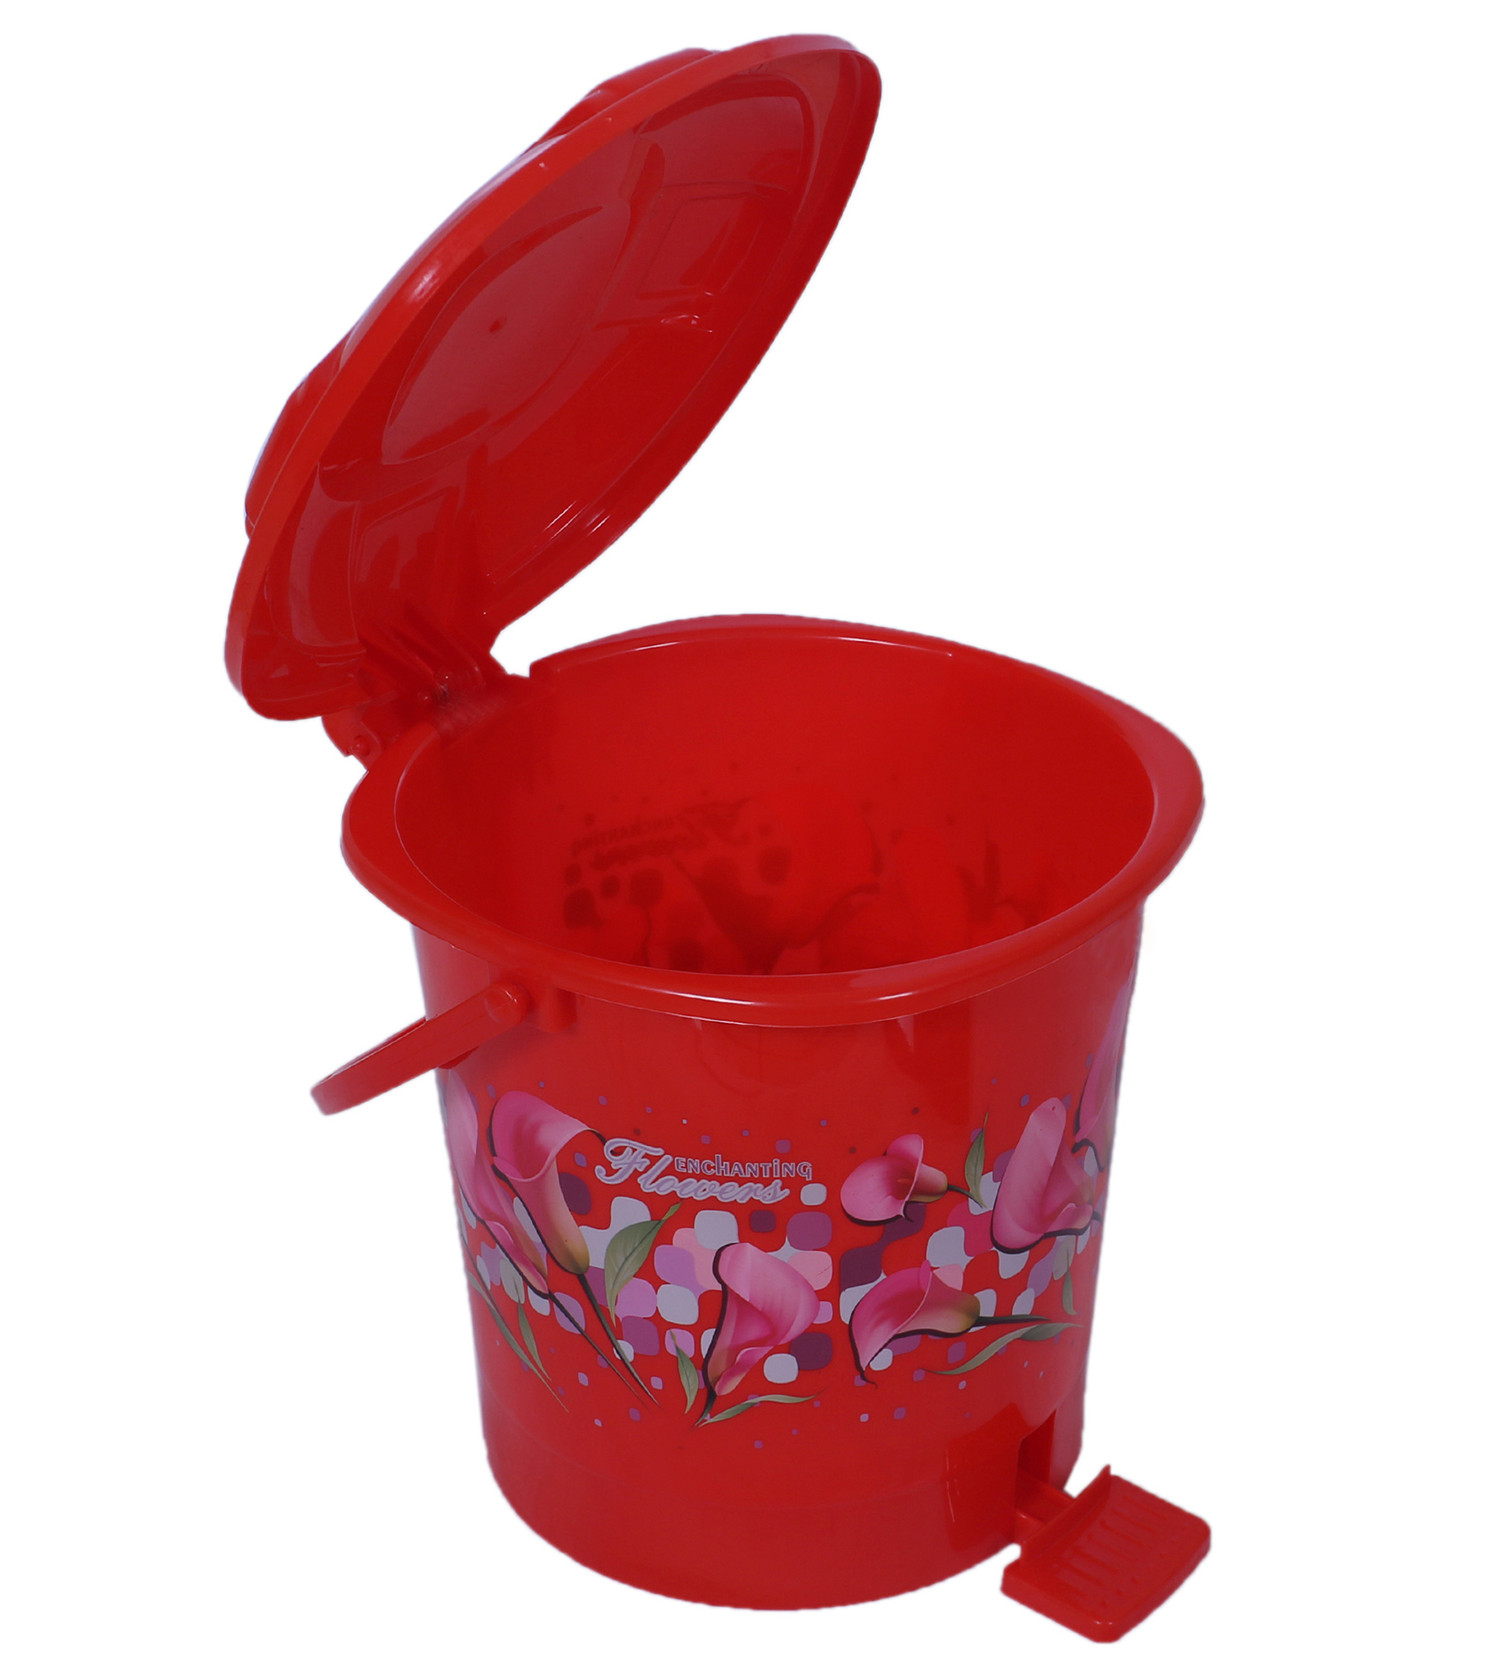 Kuber Industries Durable Plastic Pedal Dustbin|Waste Bin|Trash Can For Kitchen & Home With Handle,7 Litre,Pack of 2 (Red & Pink)